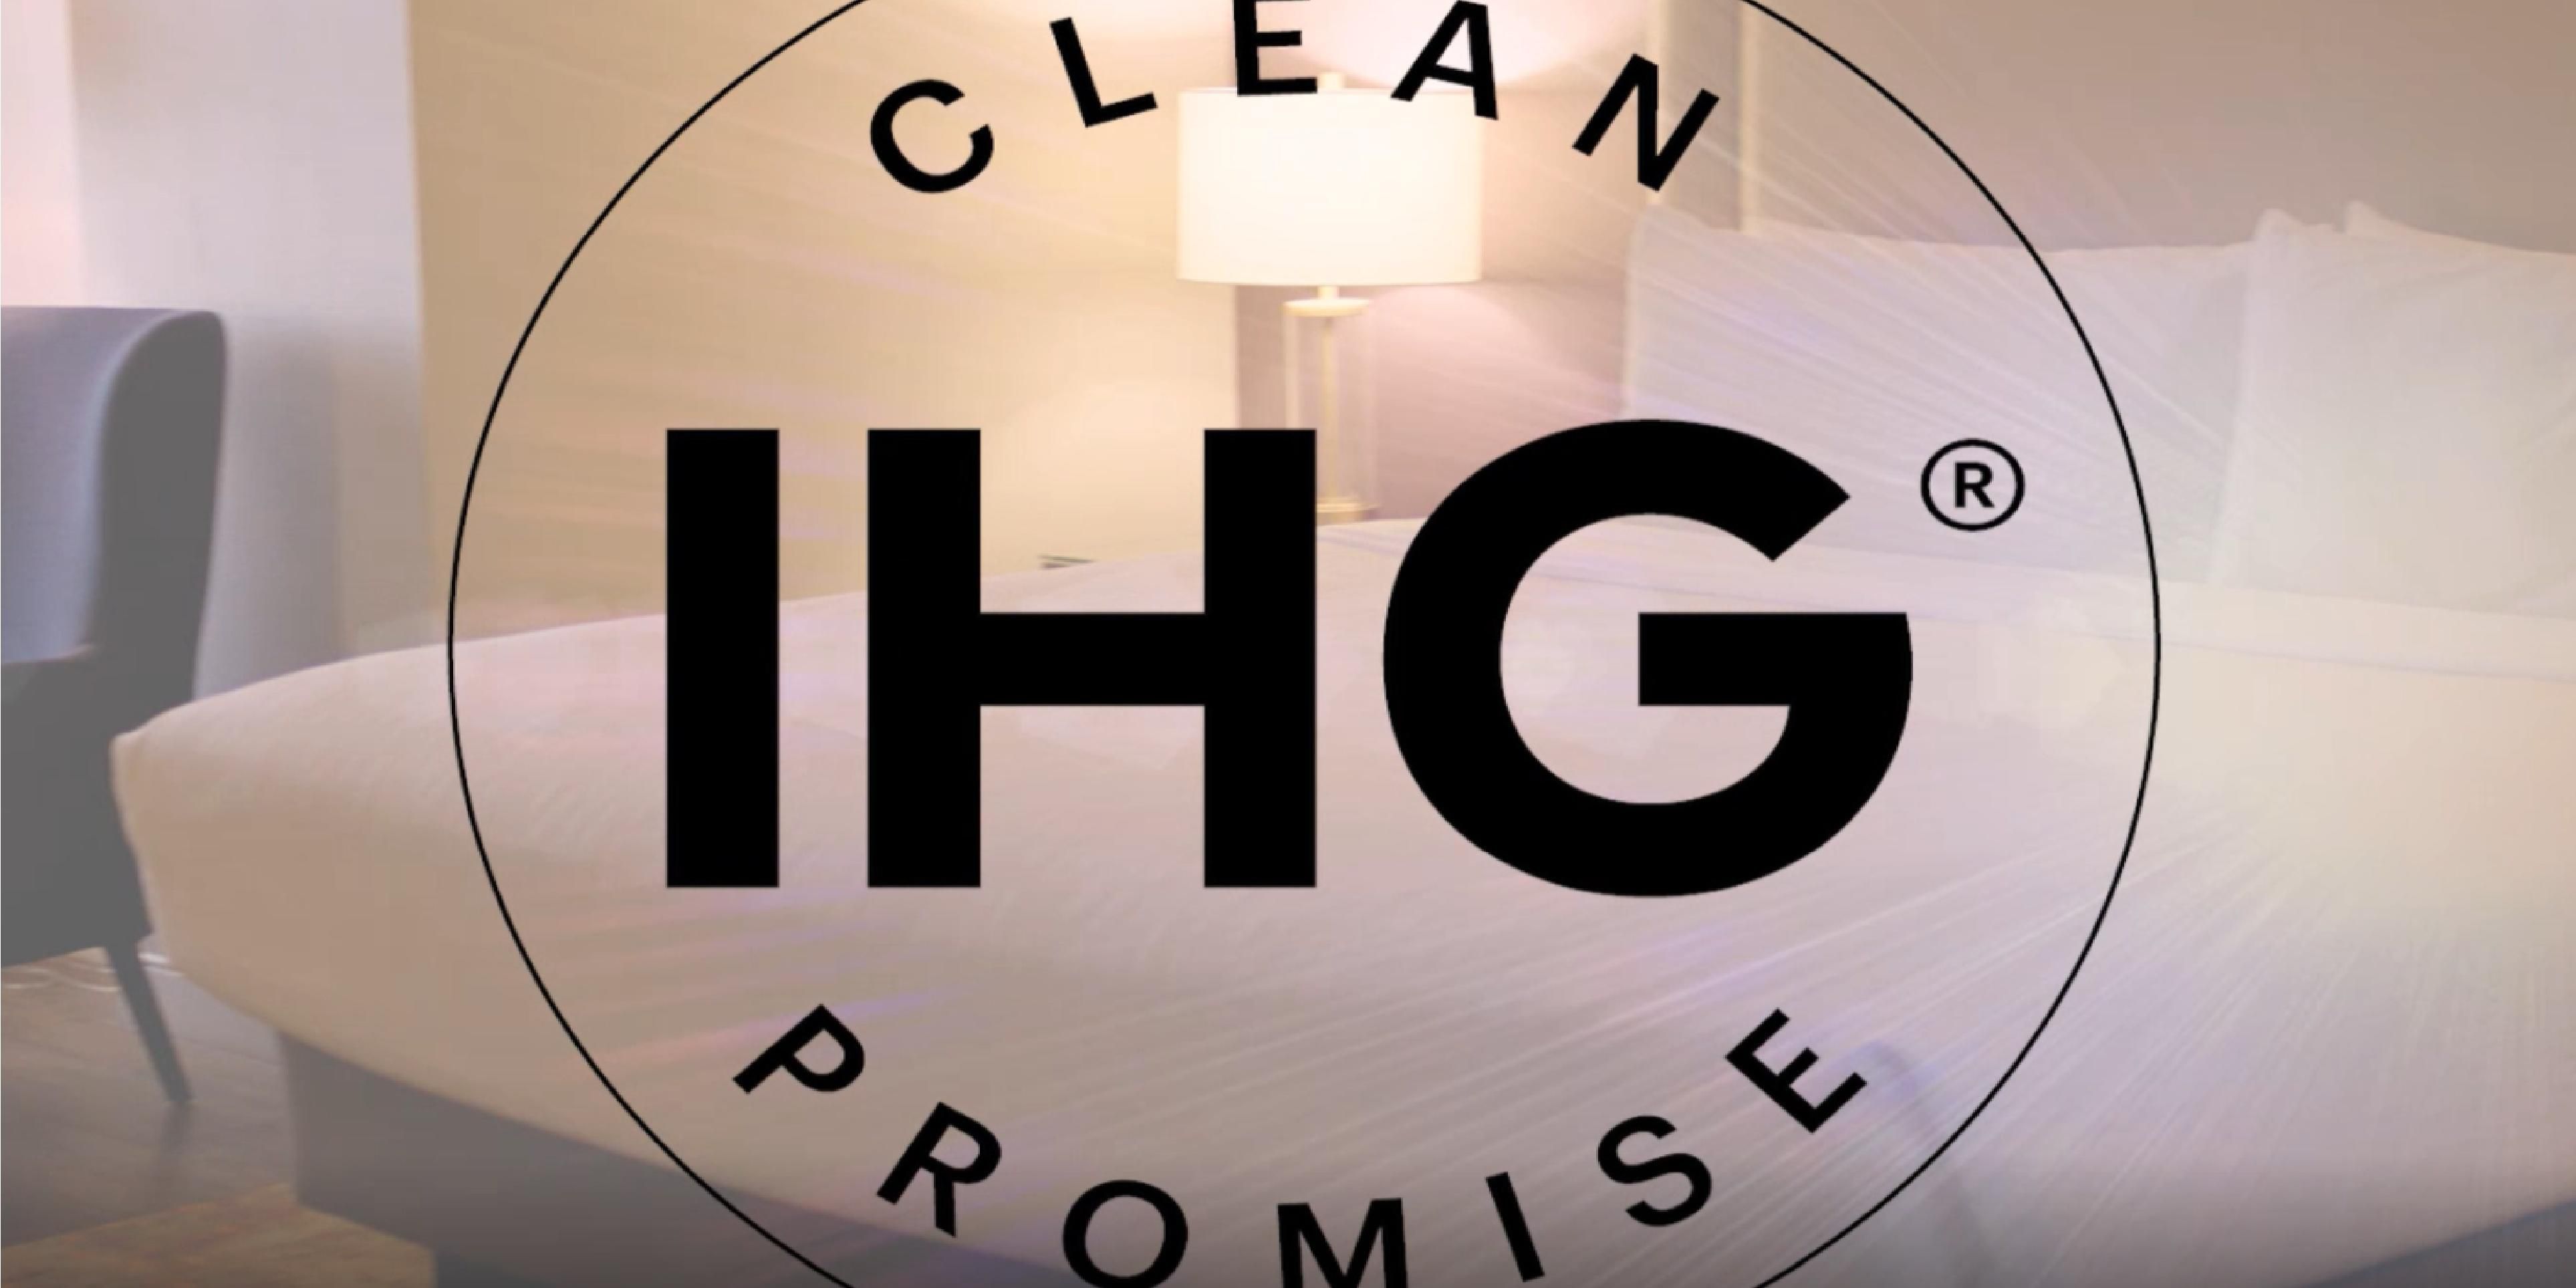 We are committed to high levels of cleanliness. Before your arrival, everything in the room has been deep cleaned following our IHG Way of Clean process with hospital-grade disinfectants. For your safety, we will limit entry into your room during your stay.